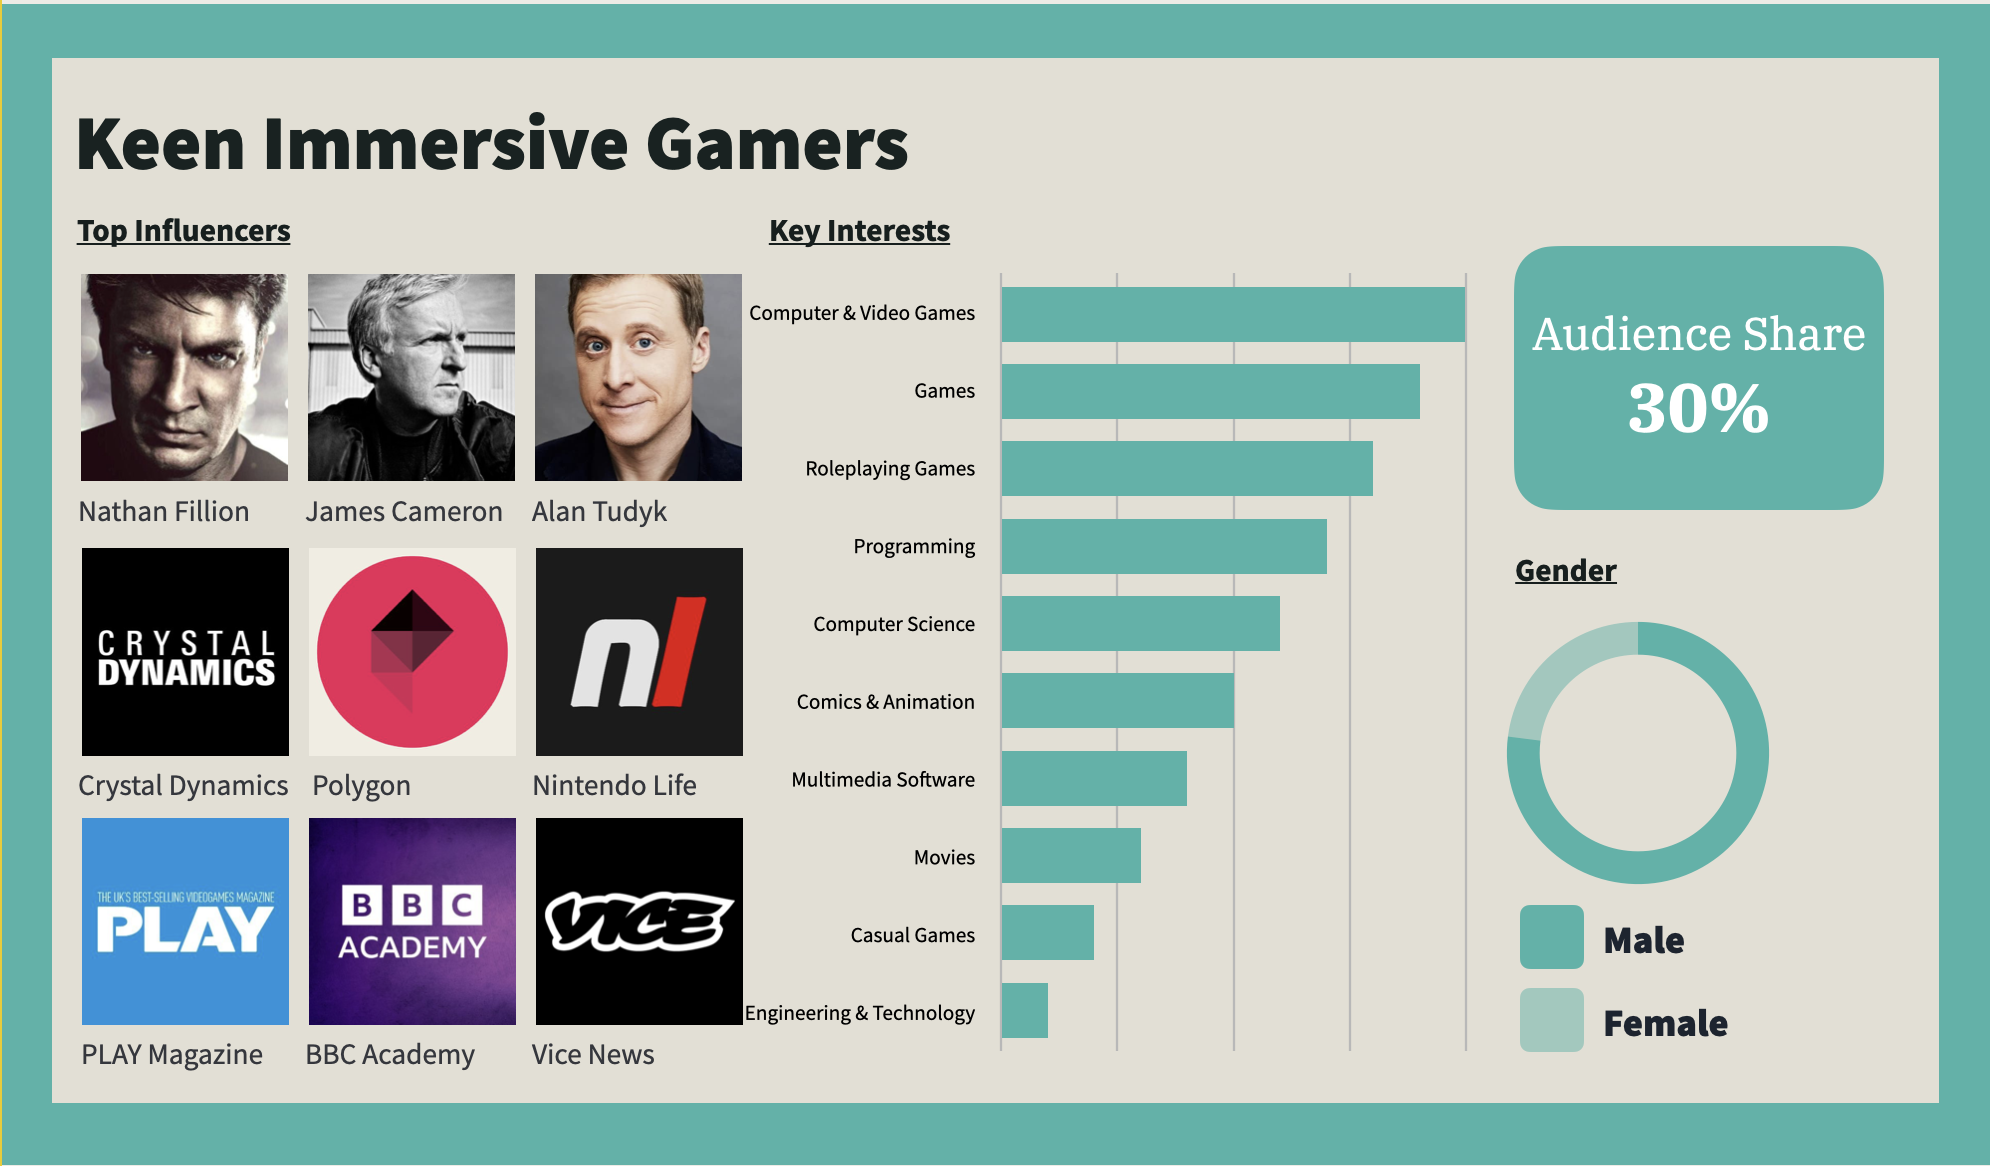 Keen Immersive Gamers Profile